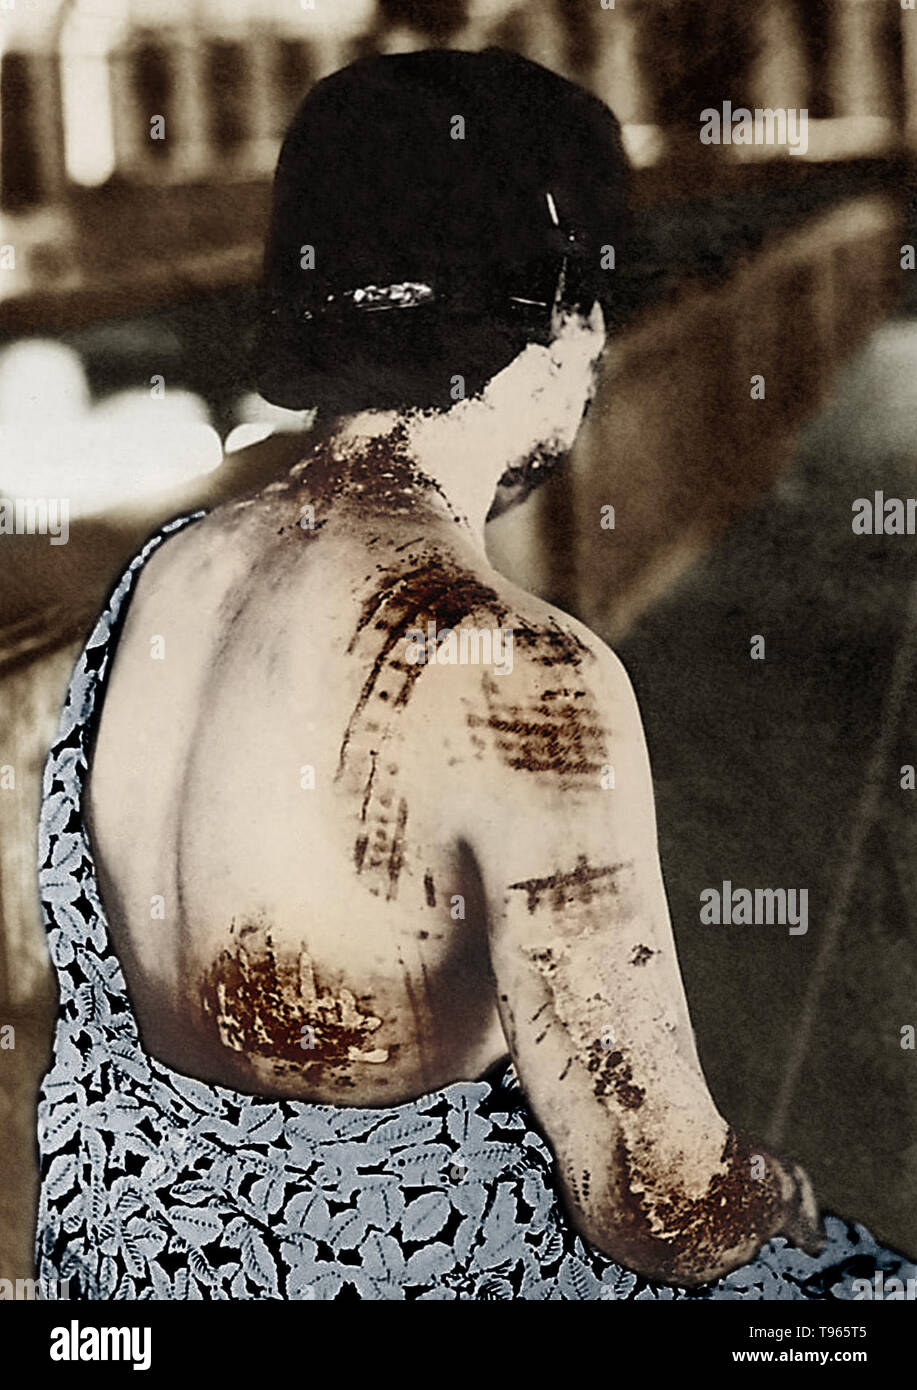 On August 6, 1945, near the end of World War II, the United States dropped an atomic bomb on the Japanese city of Hiroshima, destroying the city and killing over 70,000 people. In this image from a medical report of the bombing, the dark-colored pattern of a woman's clothes is shown to have absorbed thermal energy and burned the skin, particularly around more tight-fitting areas, such as the shoulders. Stock Photo